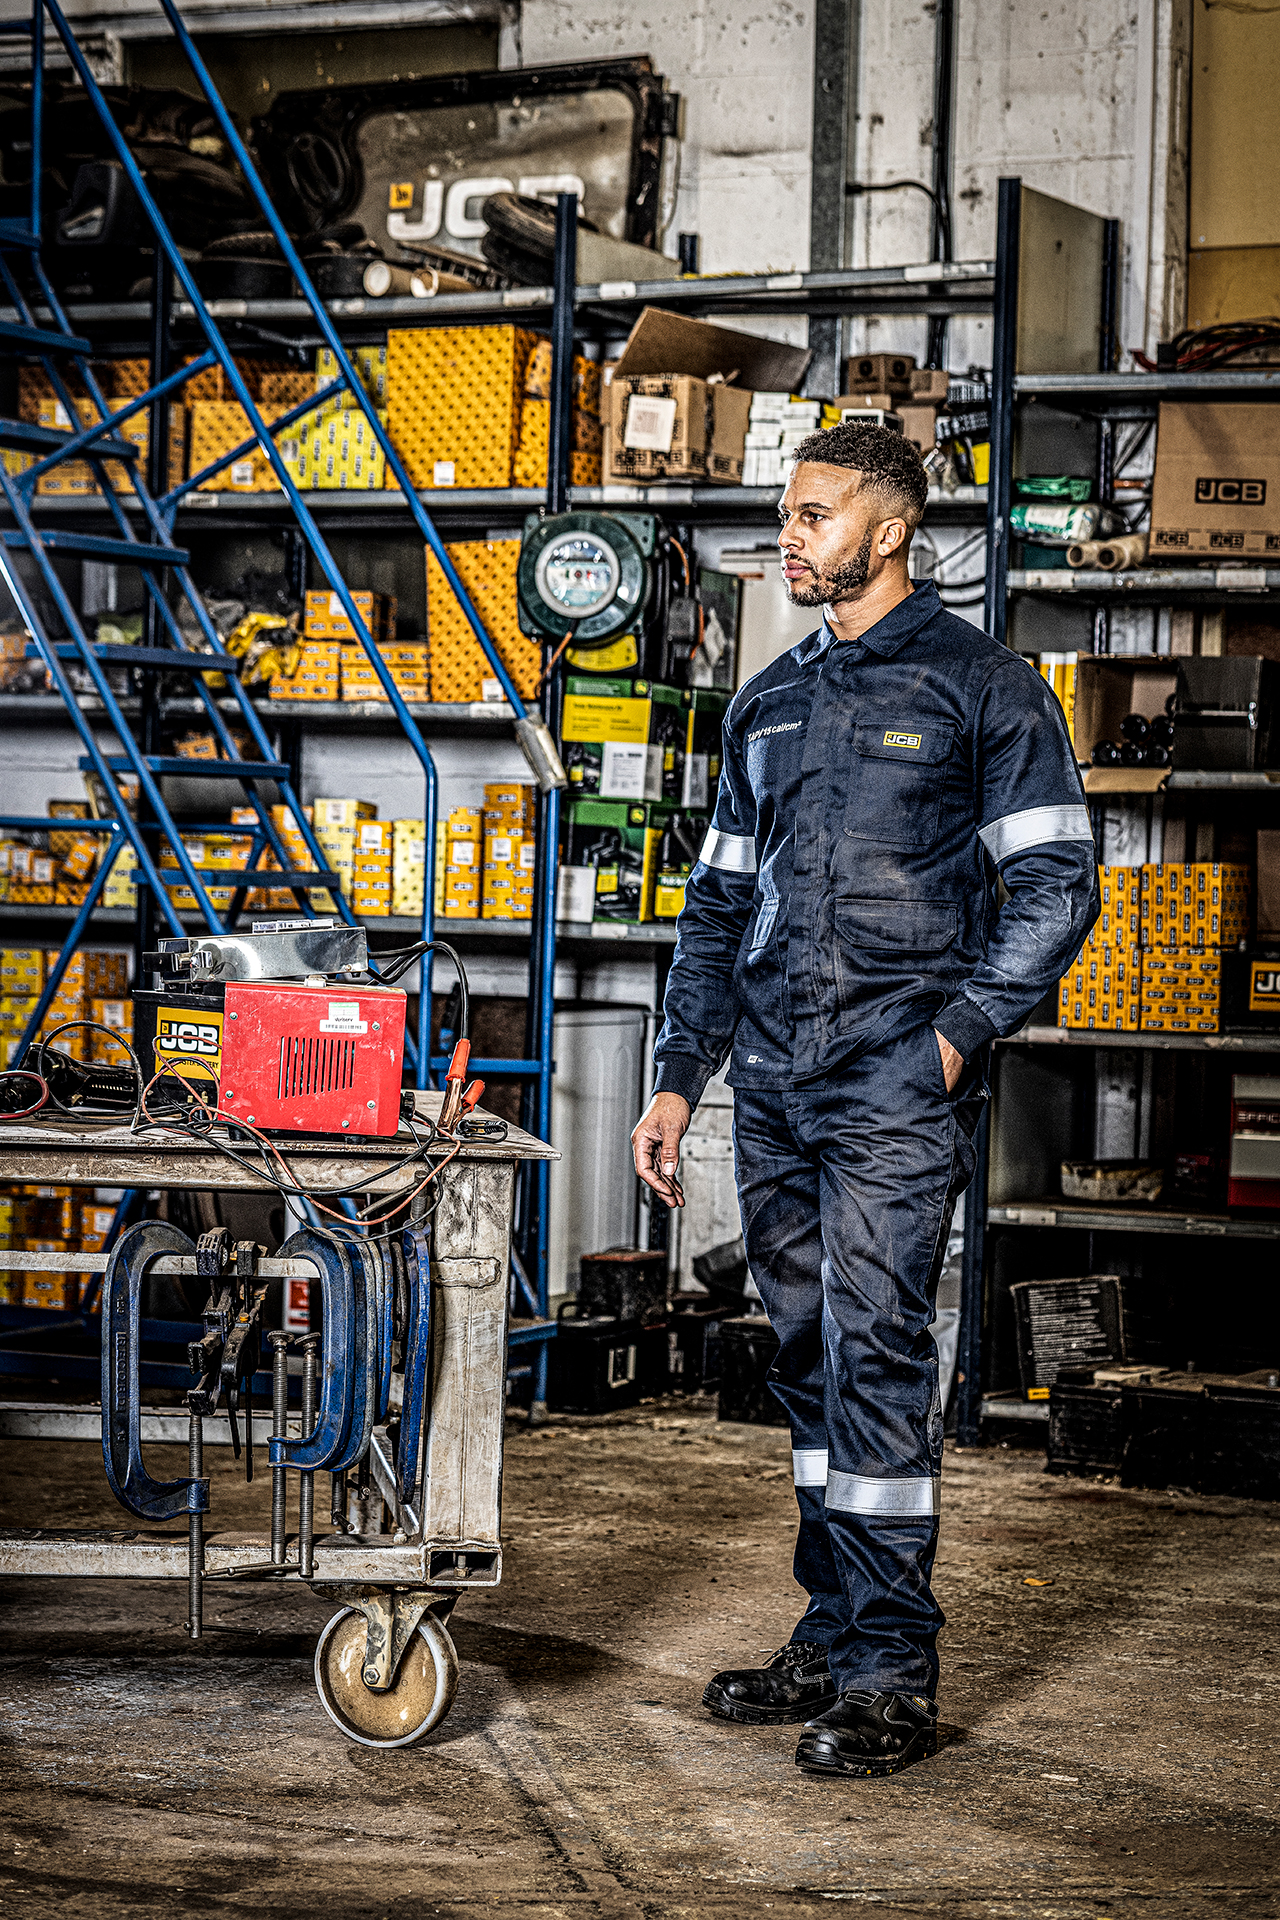 workwear commercial photography shot in manchester